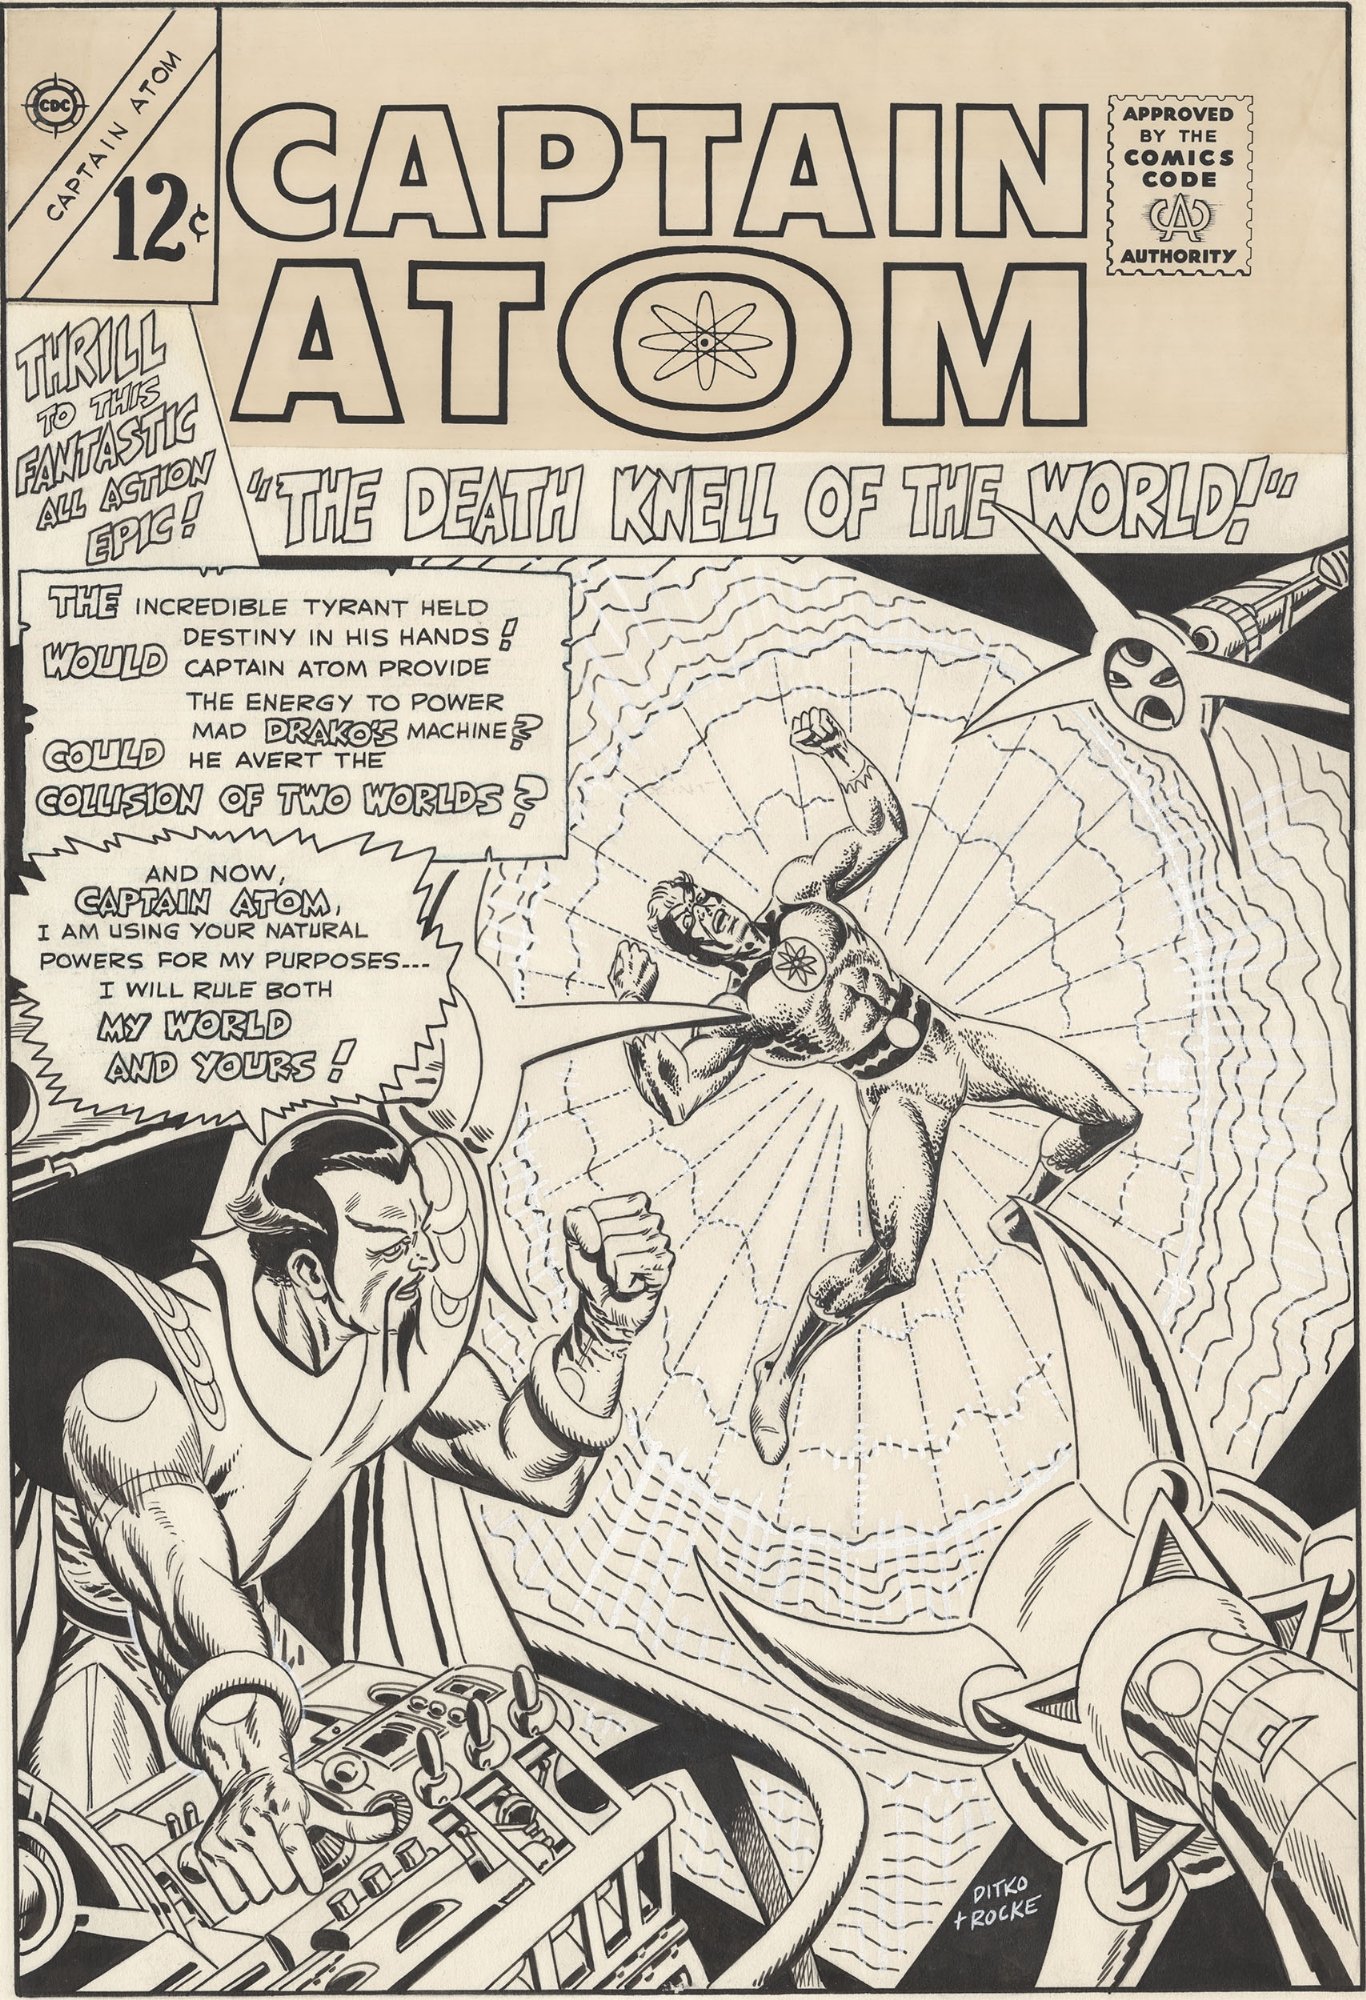 STEVE DITKO CAPTAIN ATOM #80 COVER (1966, PRIME ERA, 'TWICE-UP' SILVER AGE  SUPERHERO COVER BY A TRUE LEGEND) , in  Auctions's CLOSED  FEATURED AUCTION HIGHLIGHTS - 02/2021 Comic Art Gallery Room